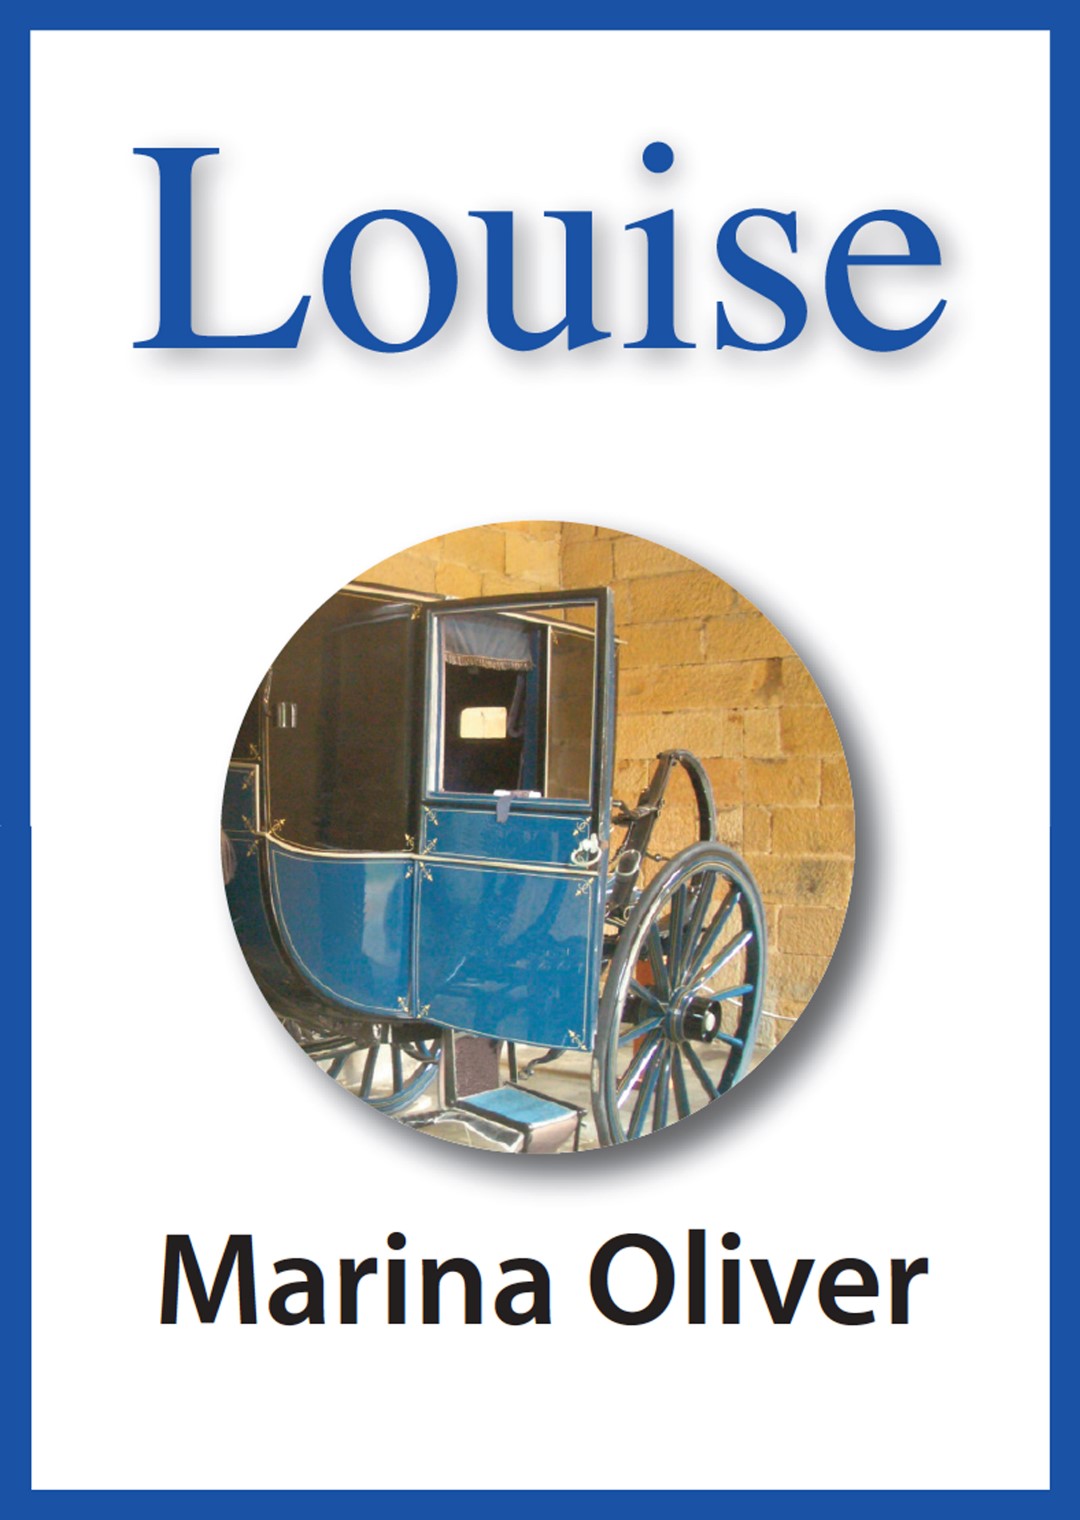 Cover of Louise ebook